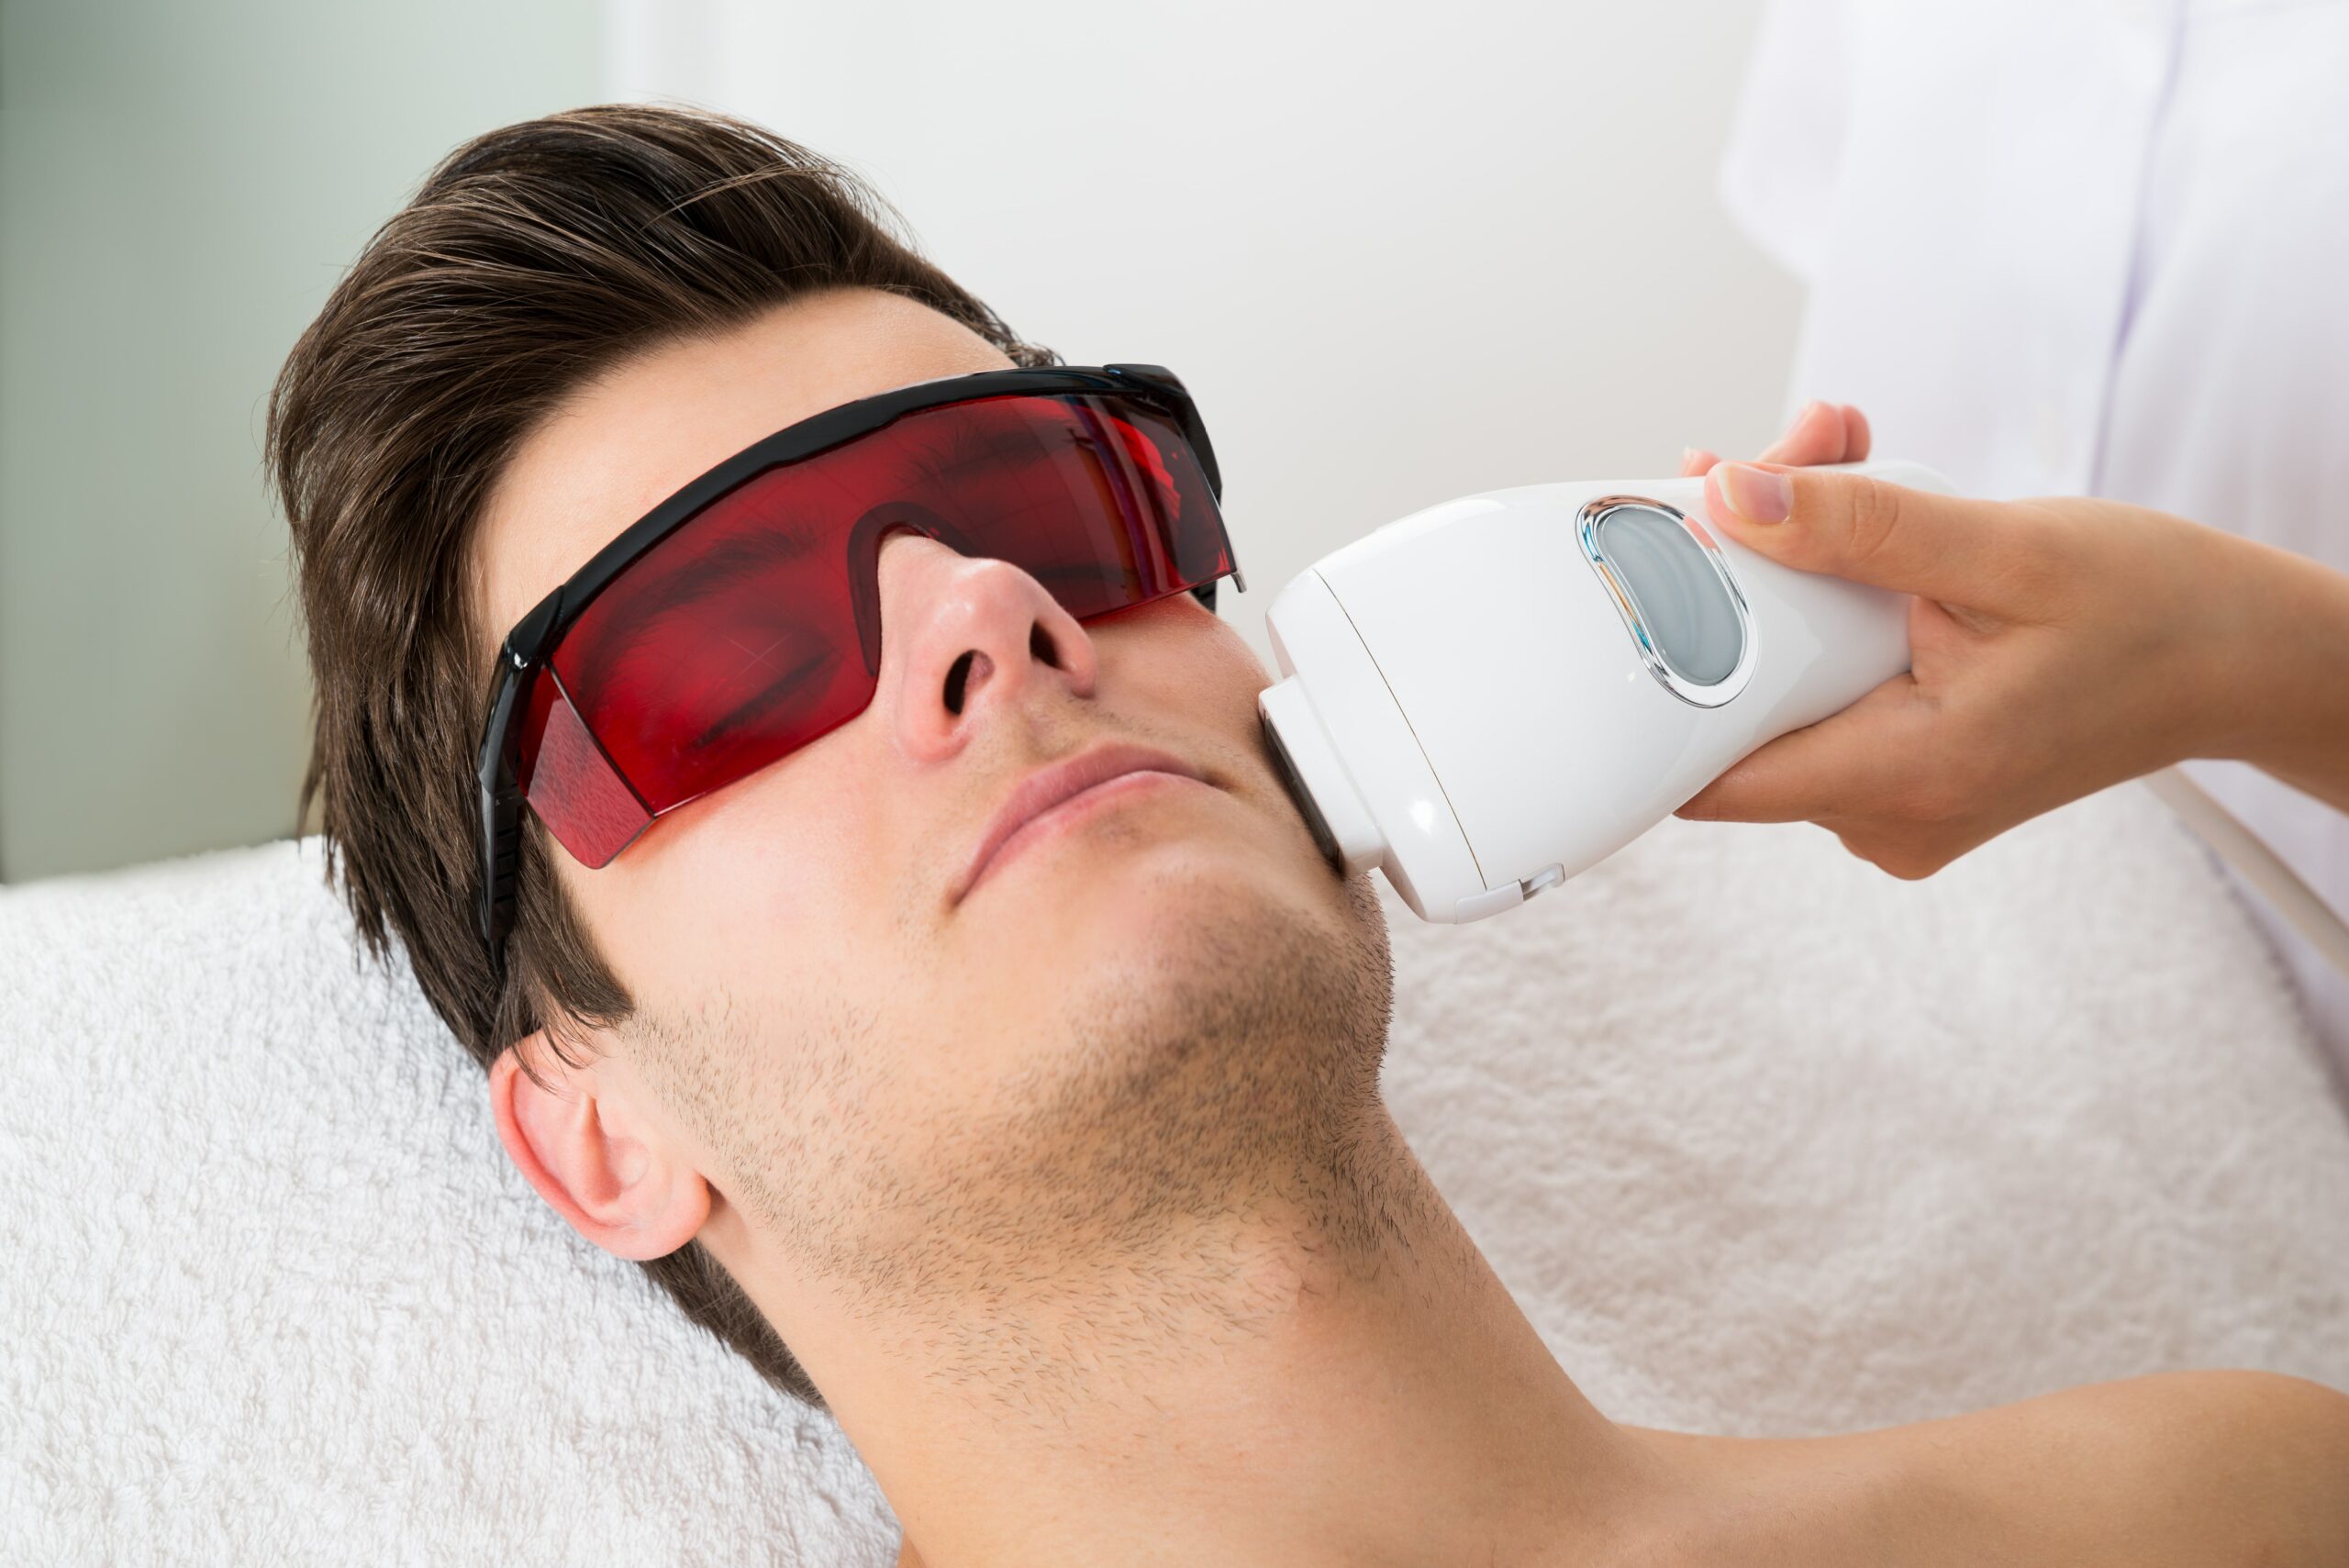 DOWNSIDES OF LASER HAIR REMOVAL